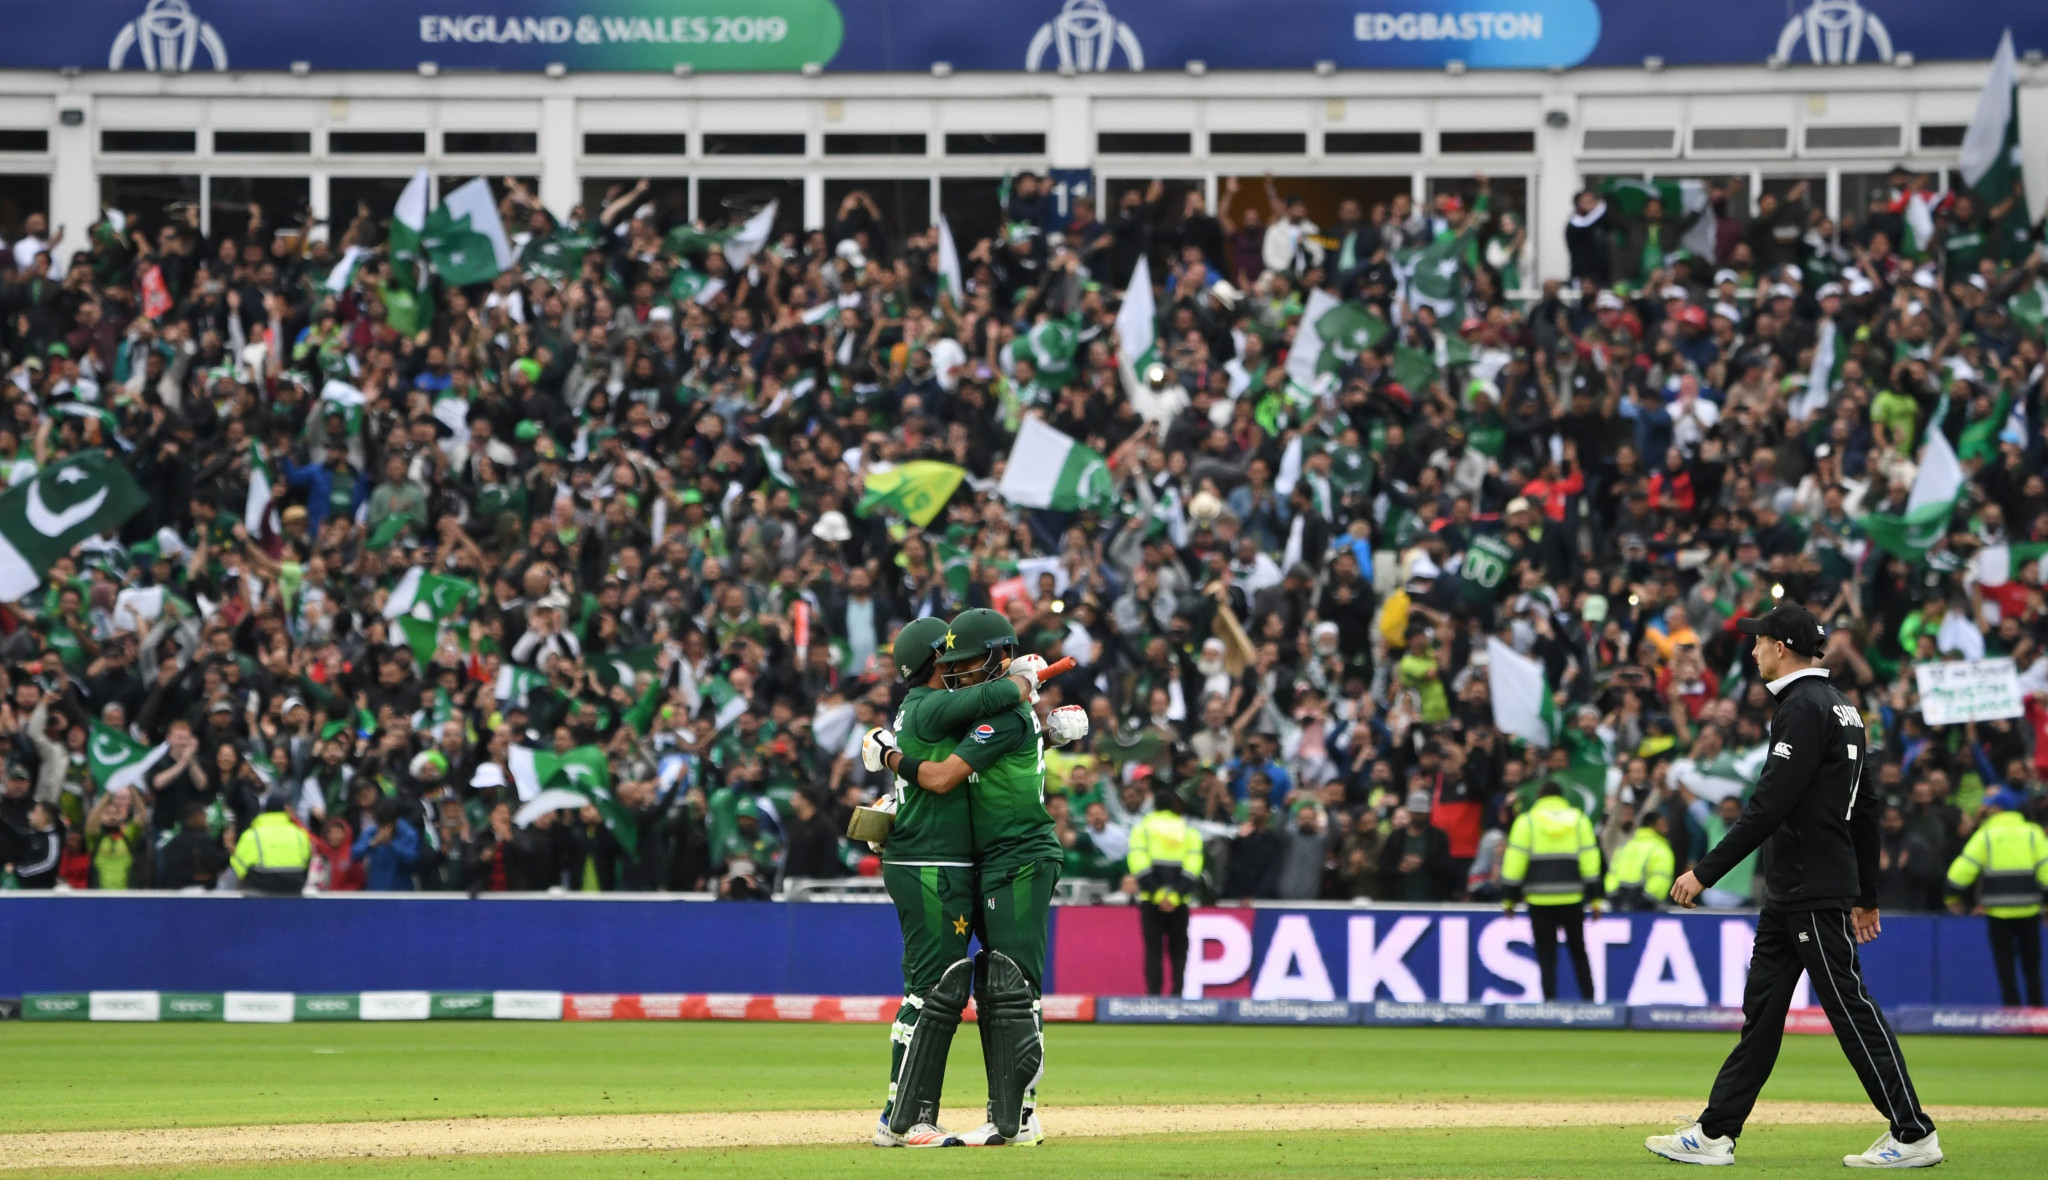 Pakistan kept their hopes of securing a semi-final place alive as they beat New Zealand by six wickets at the ICC Men’s World Cup today ©Getty Images